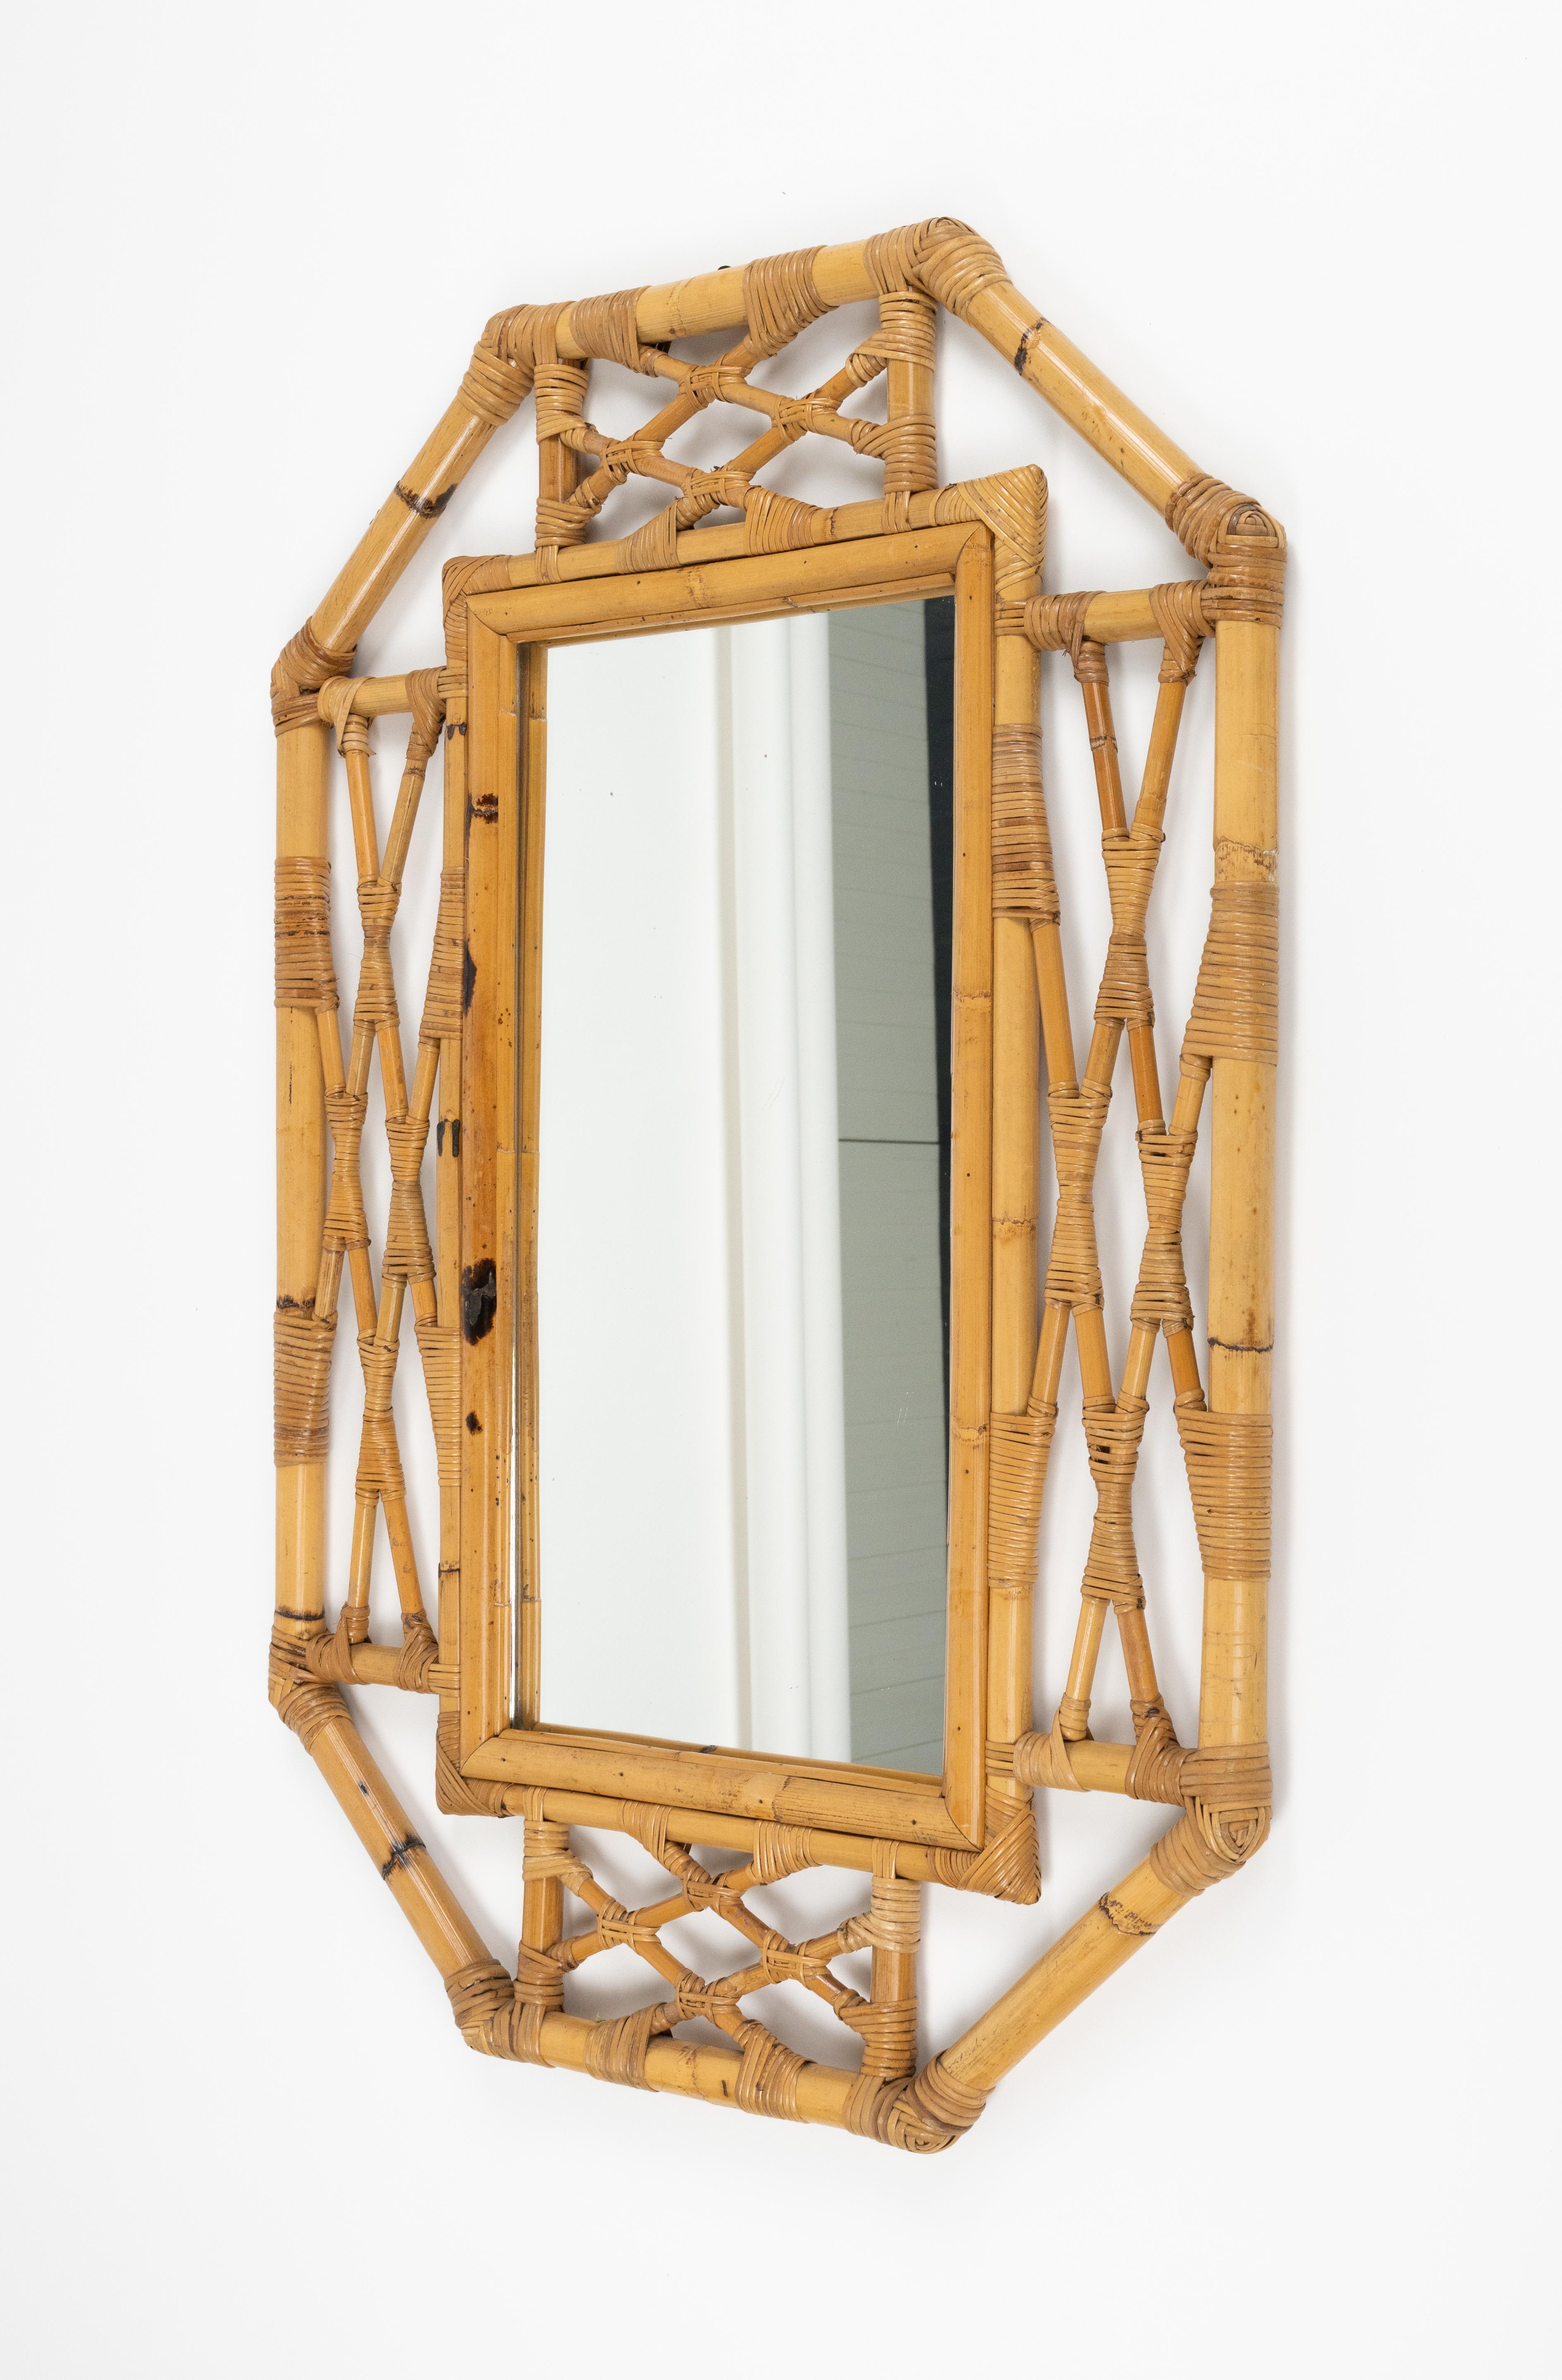 Midcentury Bamboo and Rattan Wall Mirror Vivai Del Sud Style, Italy 1970s For Sale 1